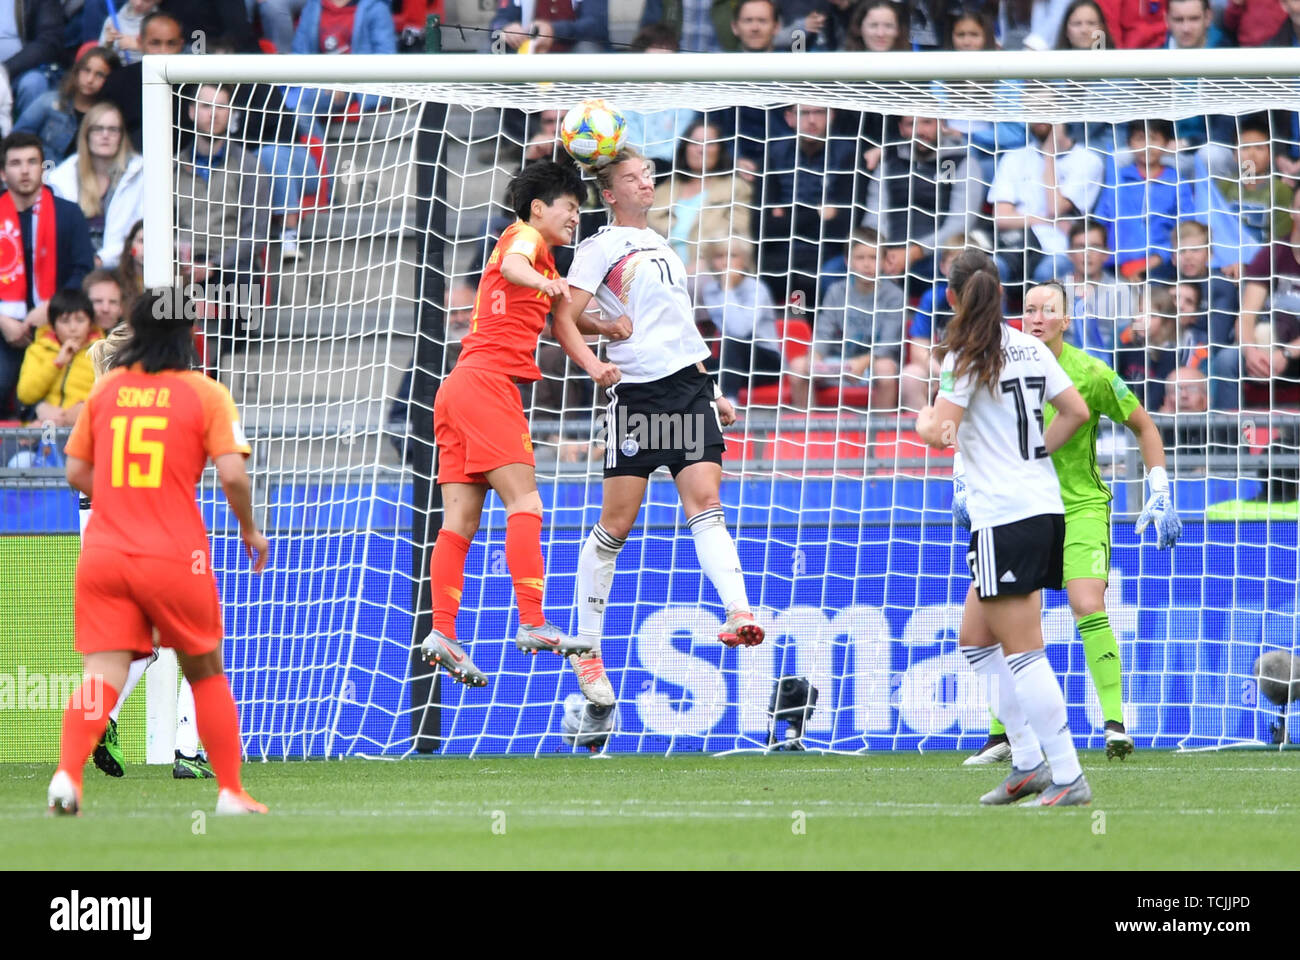 8 june 2019 Rennes, France Soccer Women World Championships Germany v China  Header-Duell between  a chinese pleayer and Alexandra Popp (DFB-Frauen) (11) Stock Photo